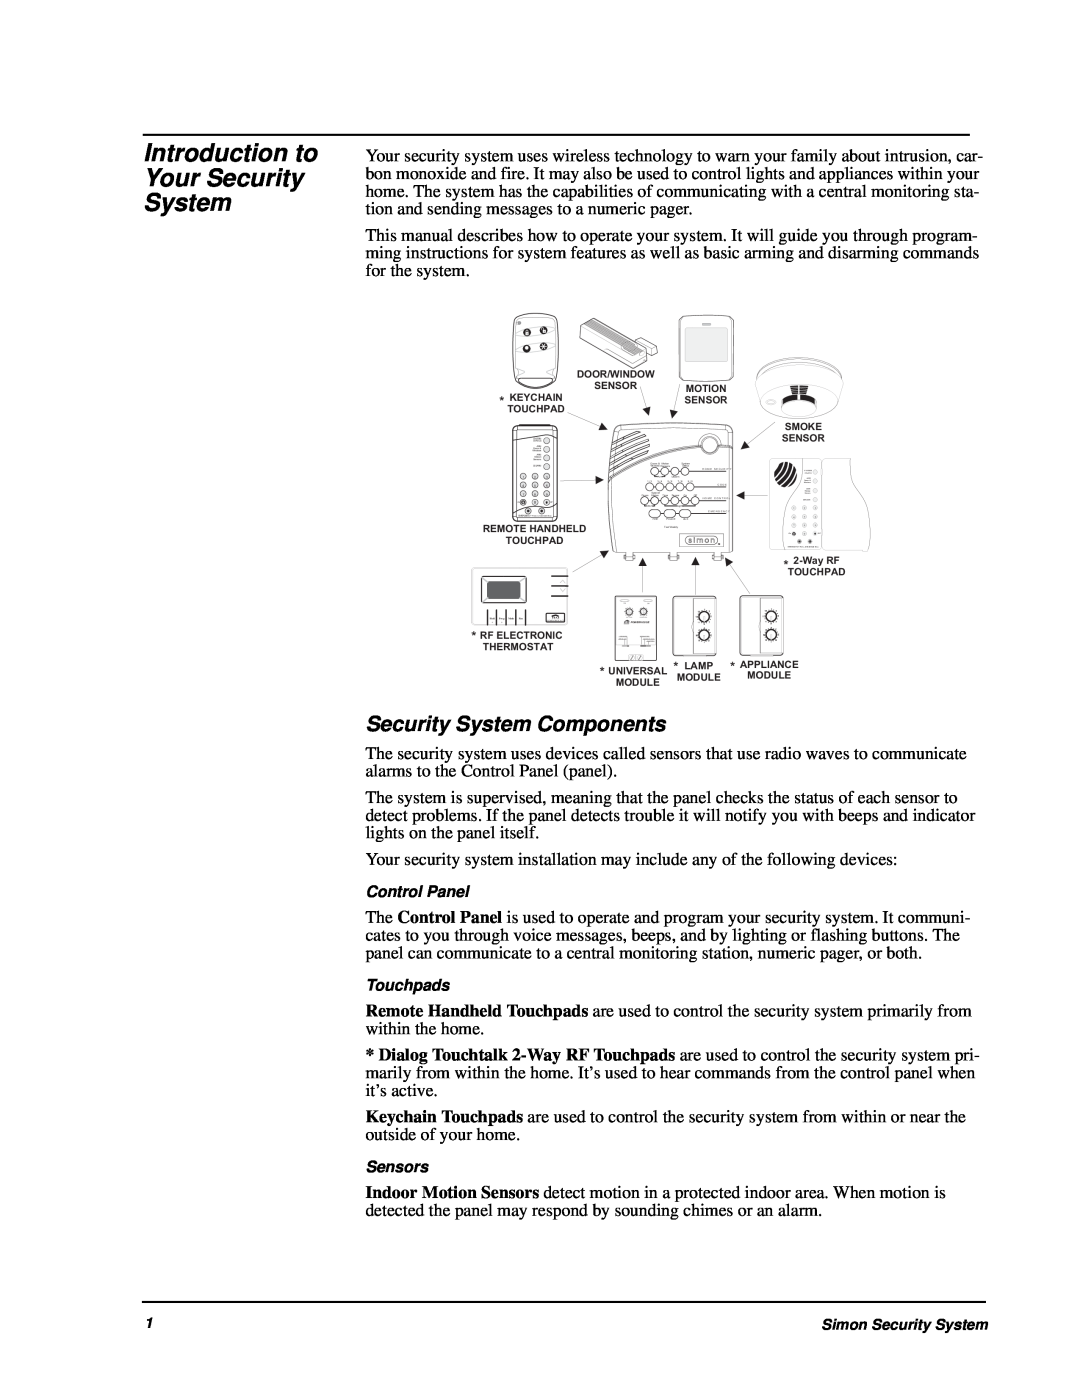 GE 60-875 manual Introduction to Your Security System, Security System Components 